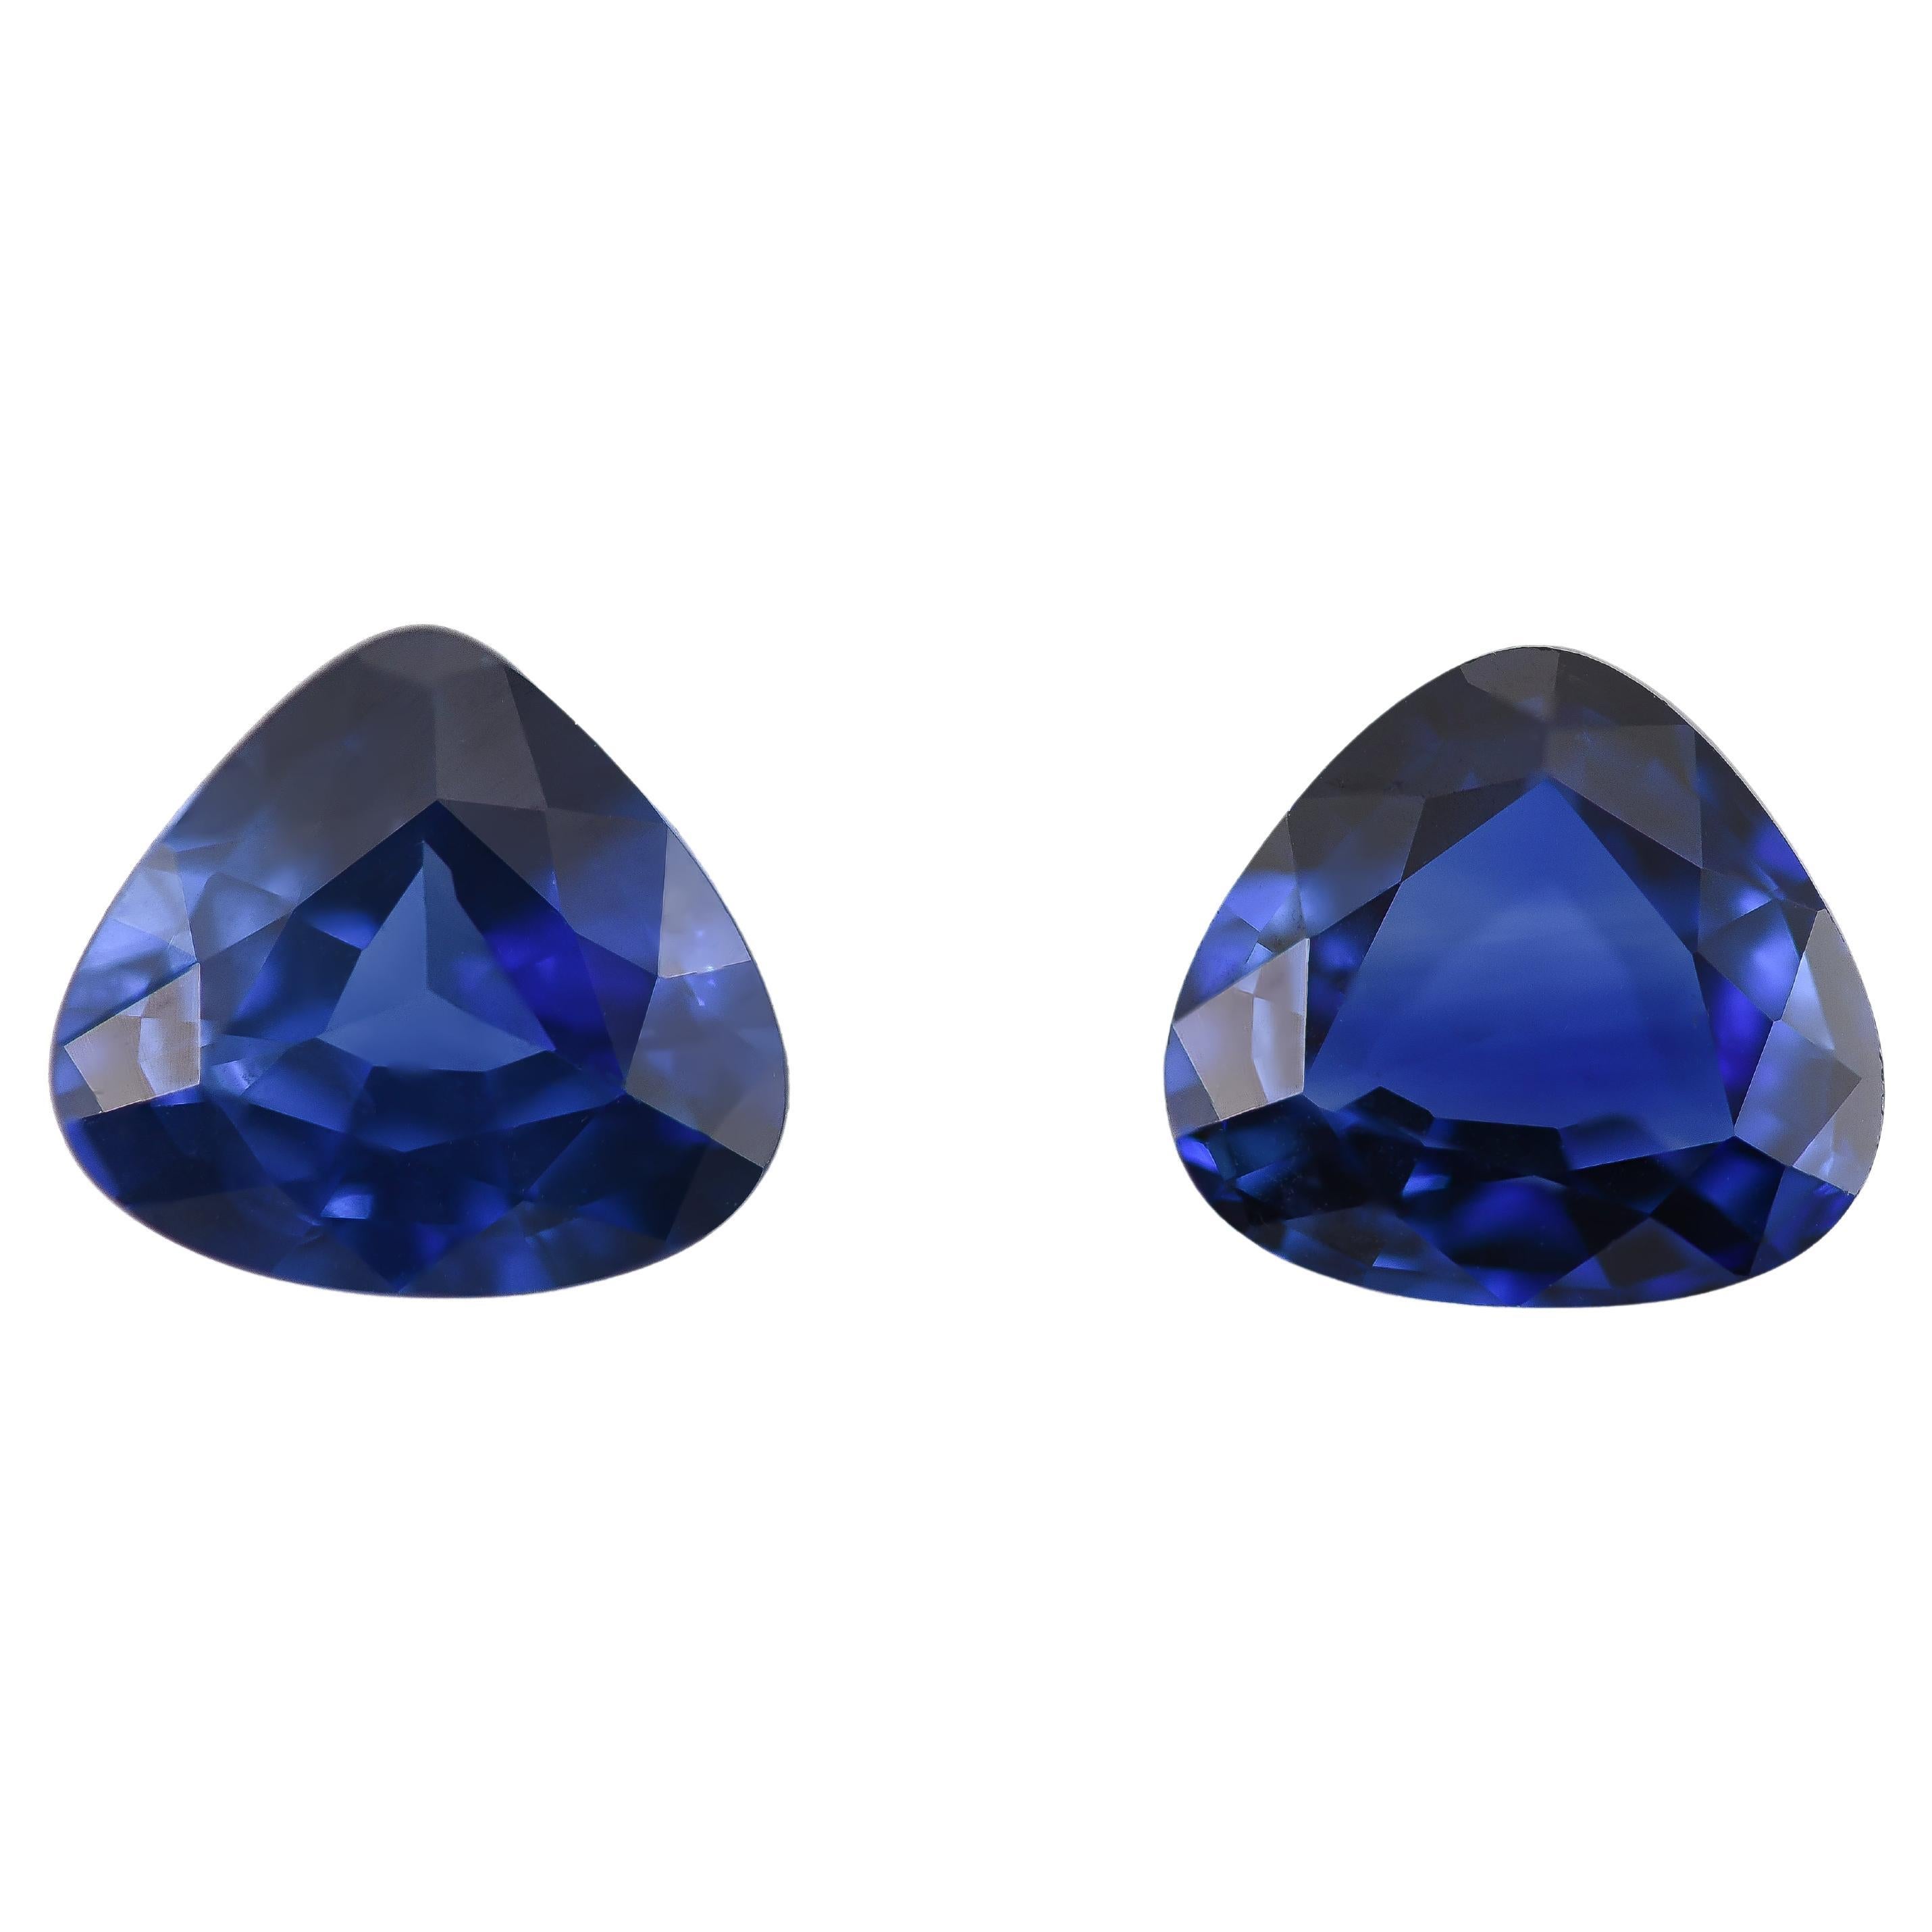 4.17 Сarats Blue Sapphire Pair with GIA Report For Sale